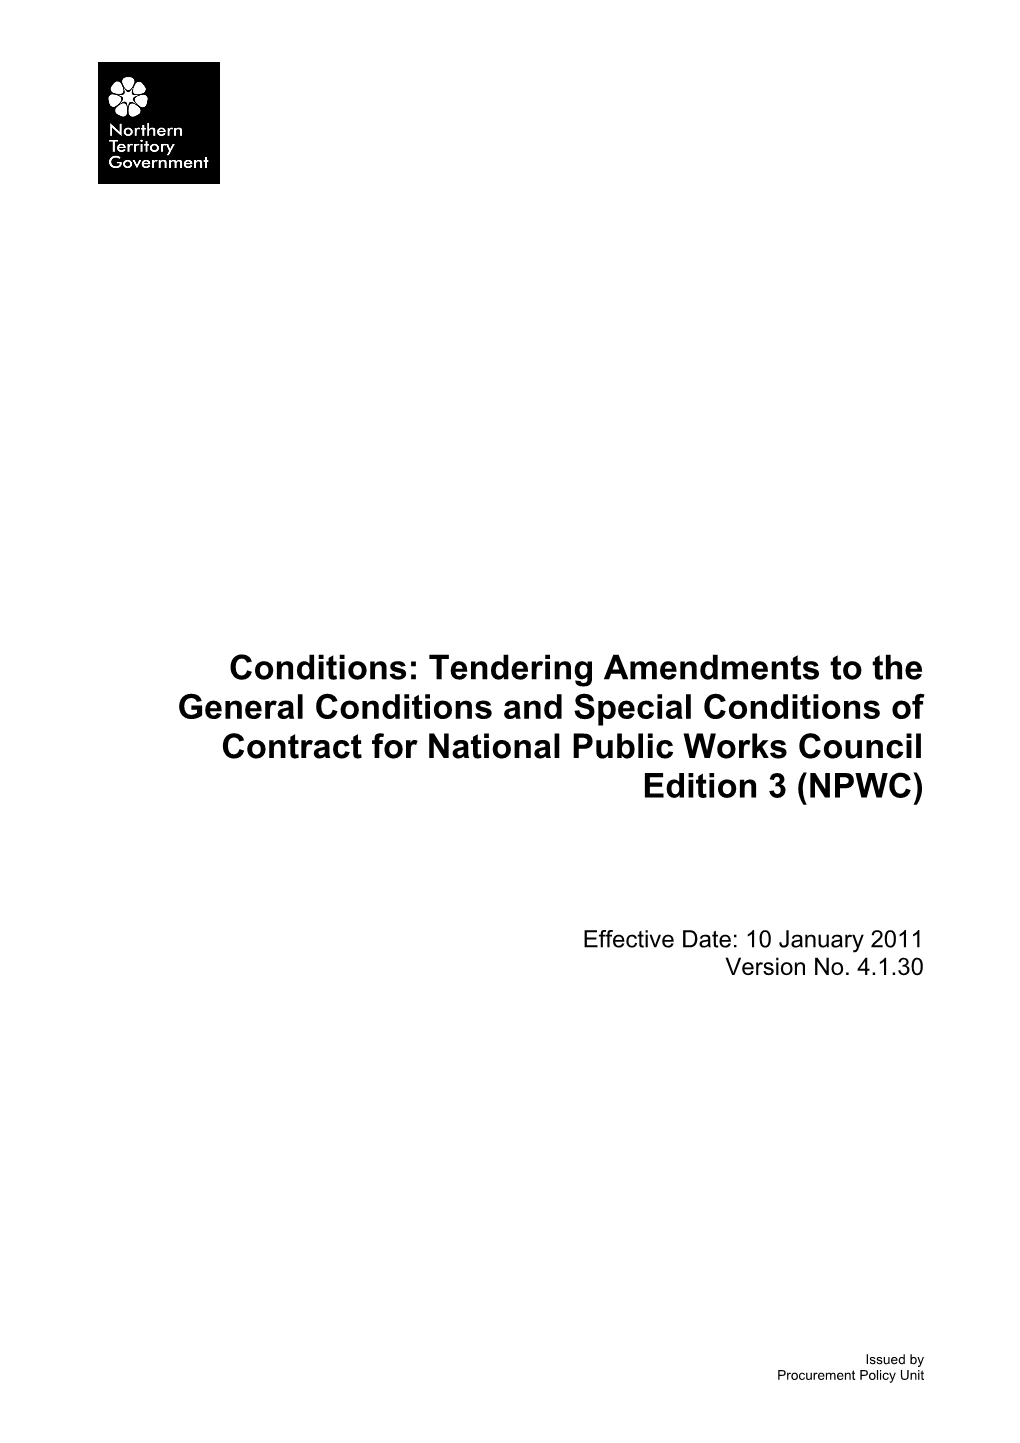 Amendments to General and Special Conditions of Contract NPWC -(V 4.1.30) (10 January 2011)